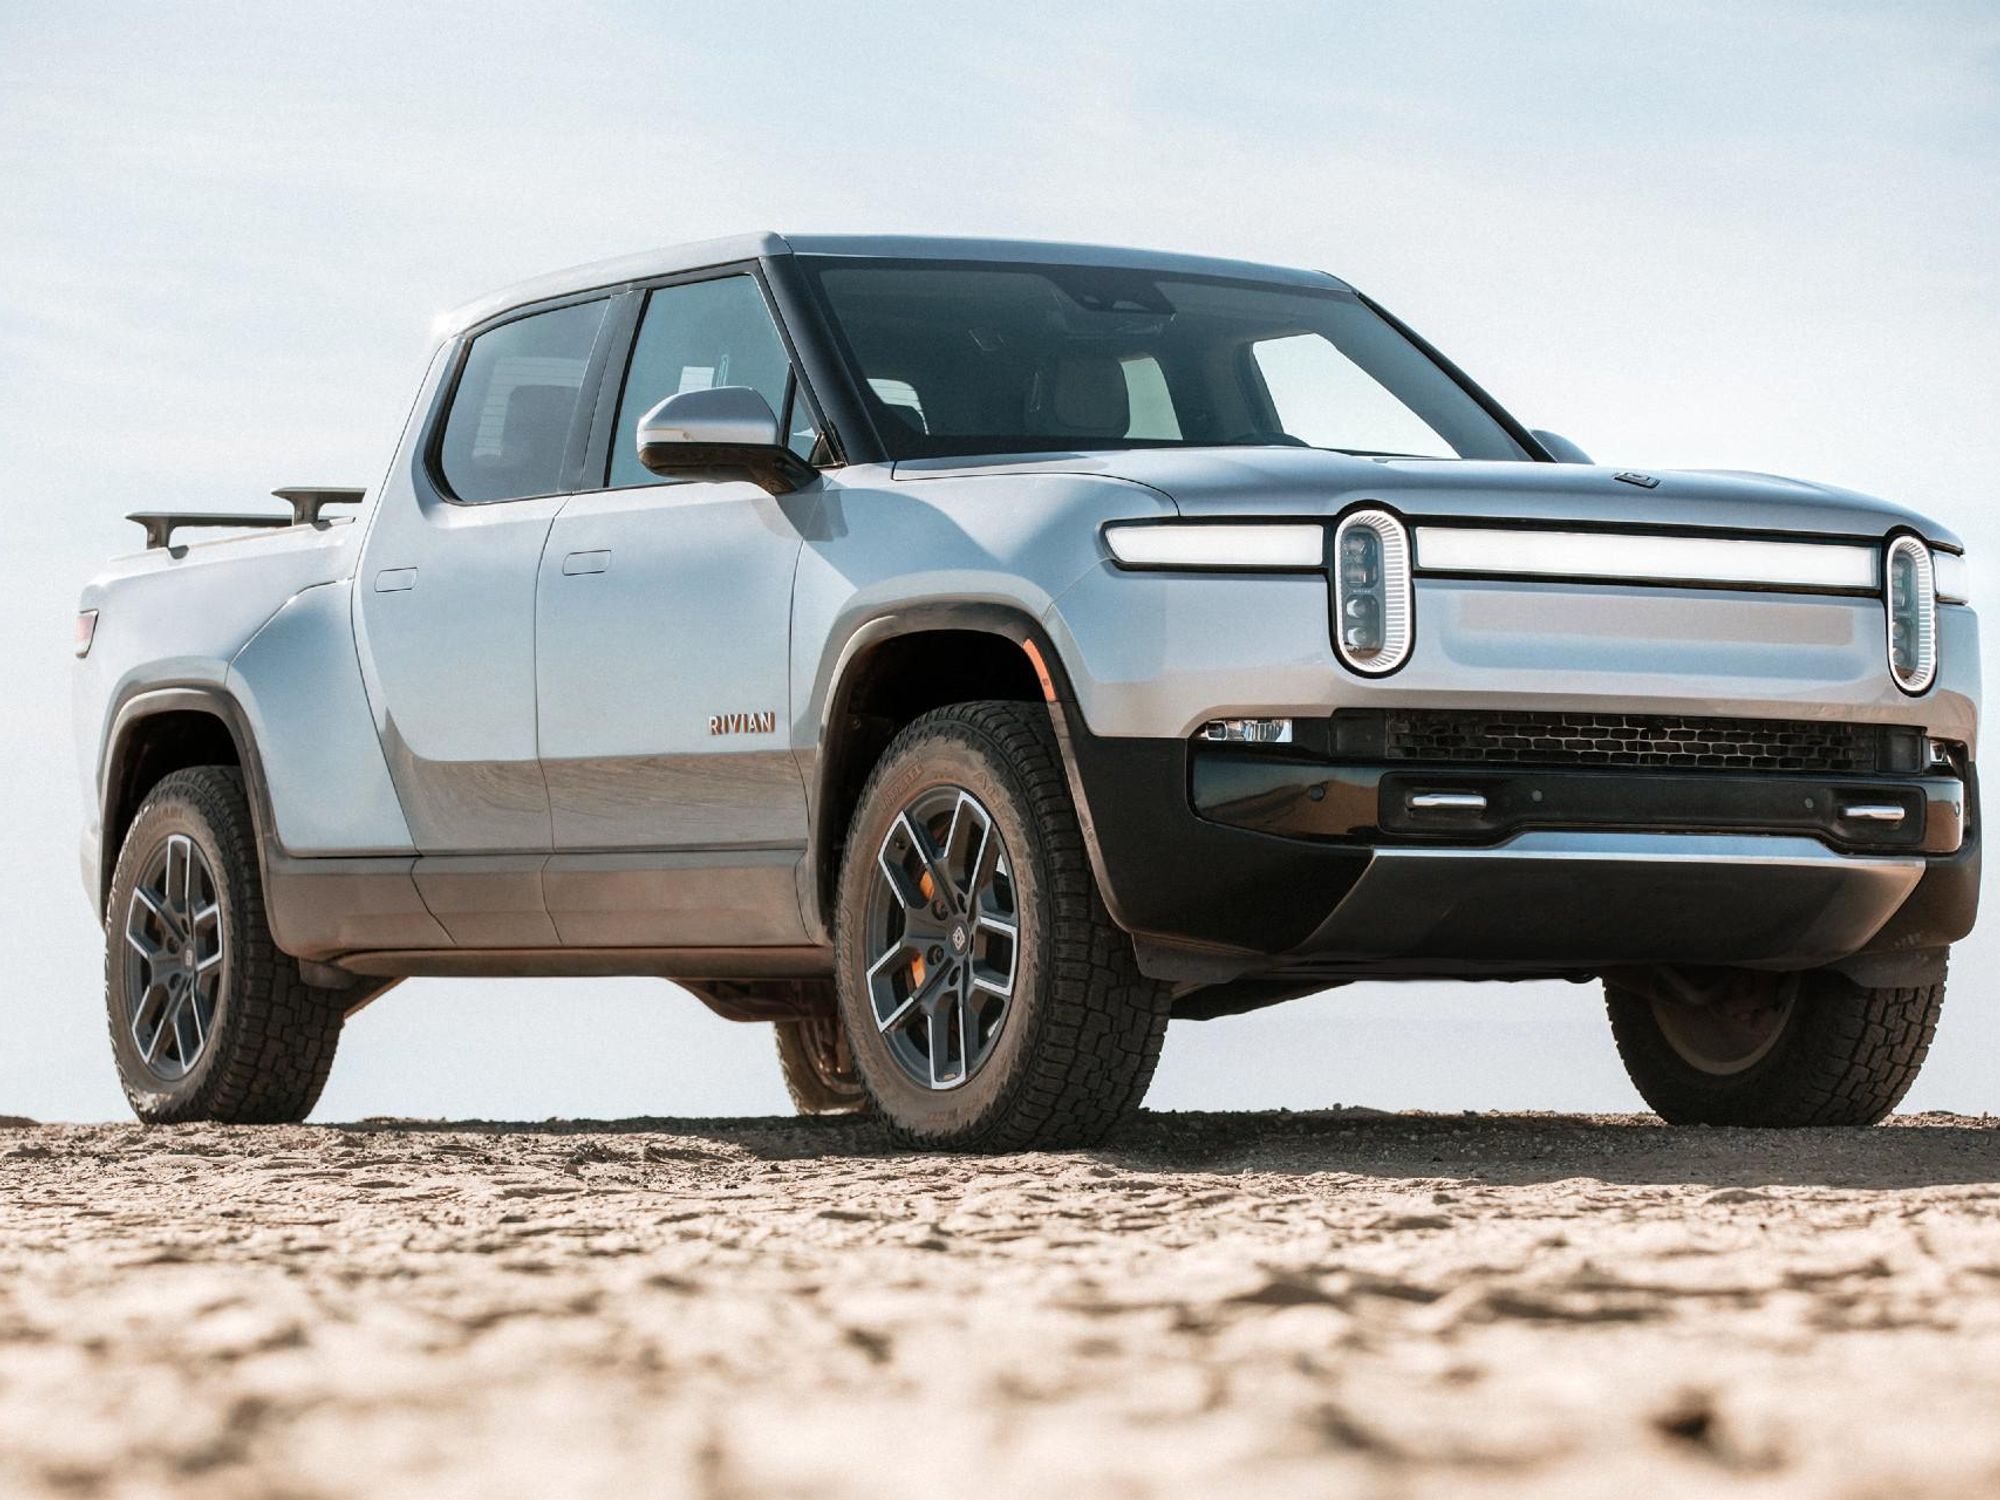 Last Chance to Own an Rivian Electric Vehicle - Transfer or Buy a Reservation Now!